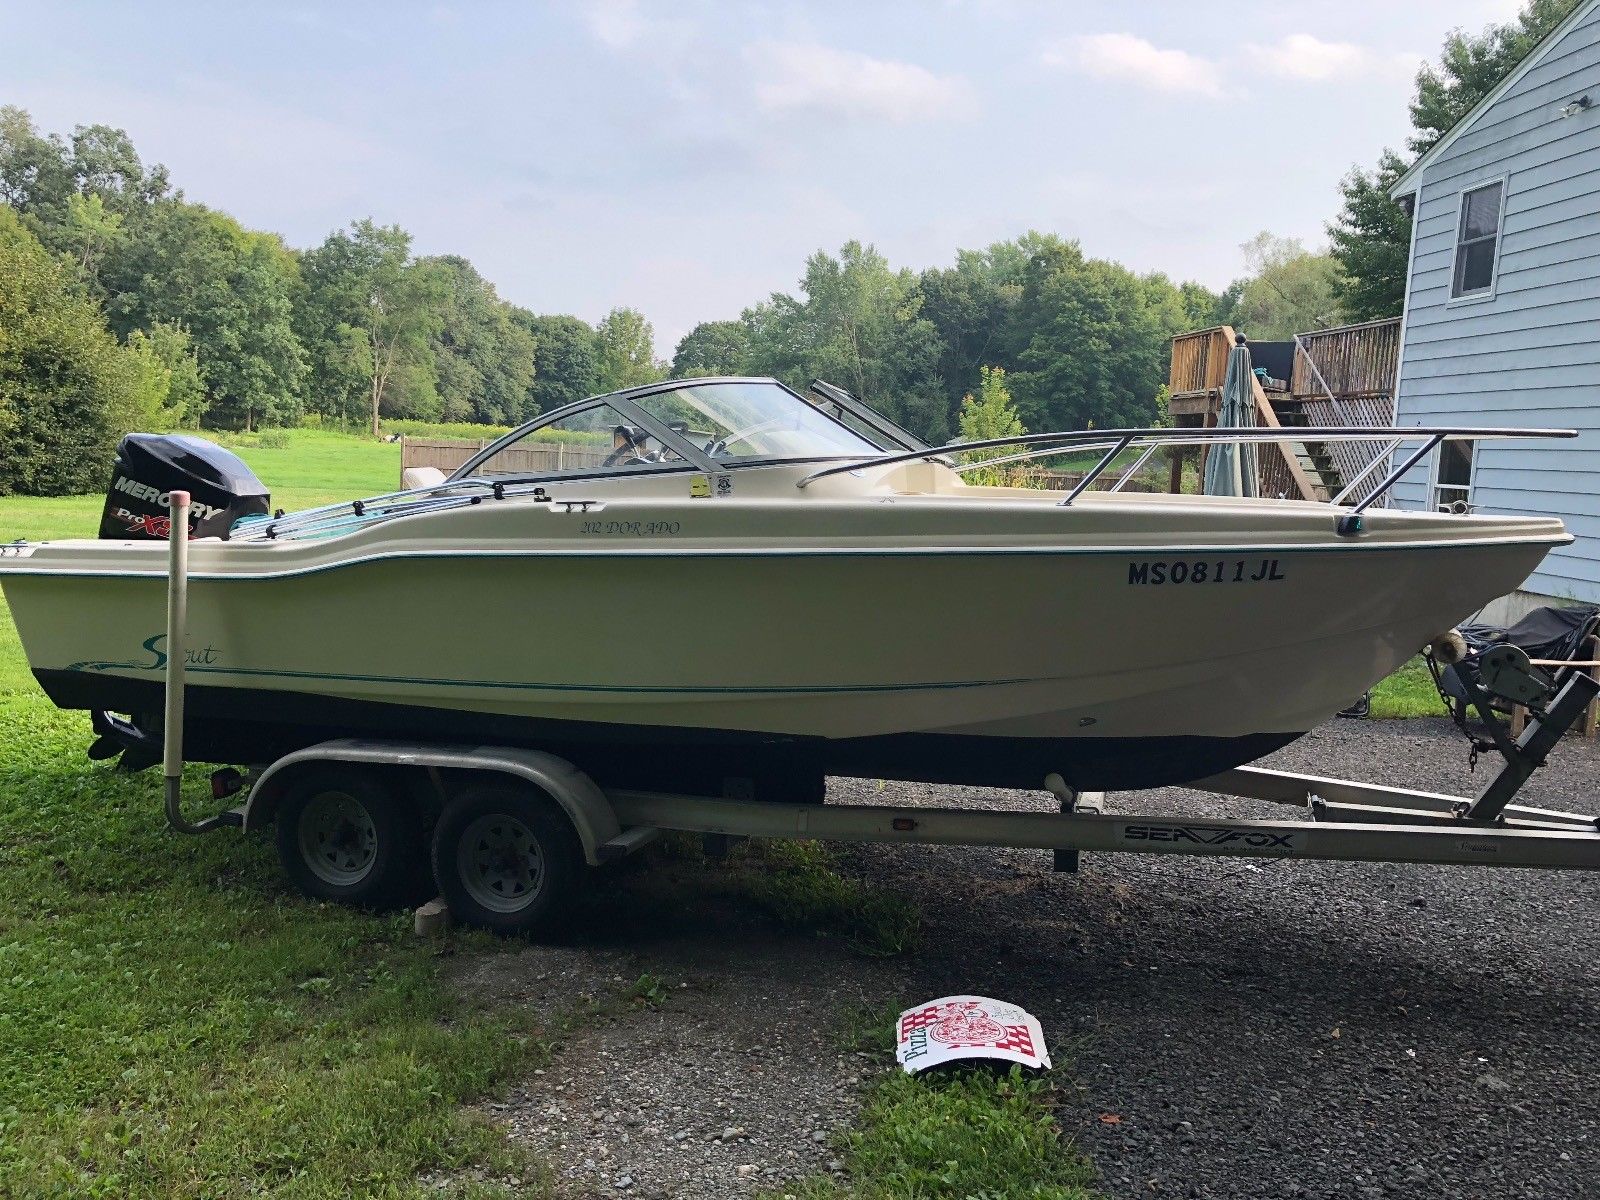 Scout 1995 for sale for $12,500 - Boats-from-USA.com